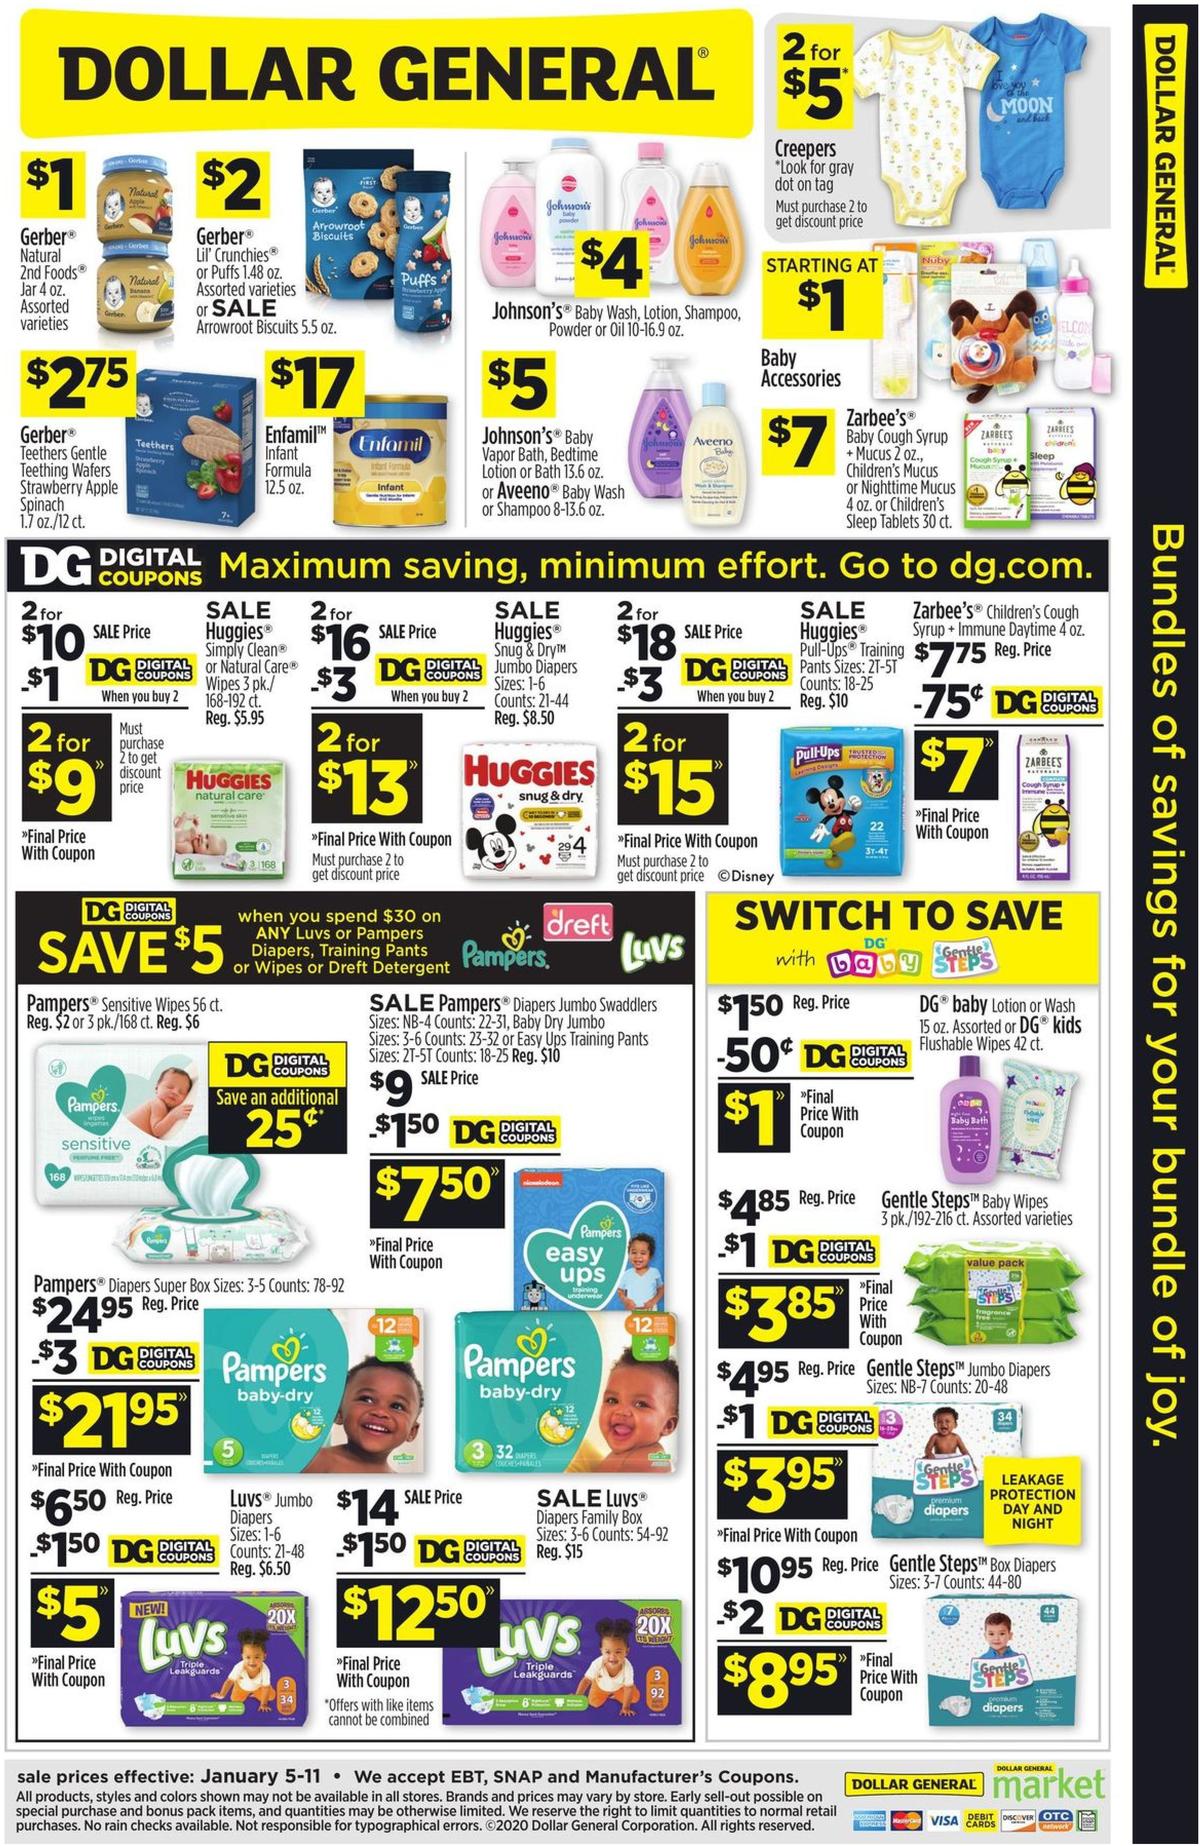 Dollar General Baby Essentials Priced Right Weekly Ad from January 5